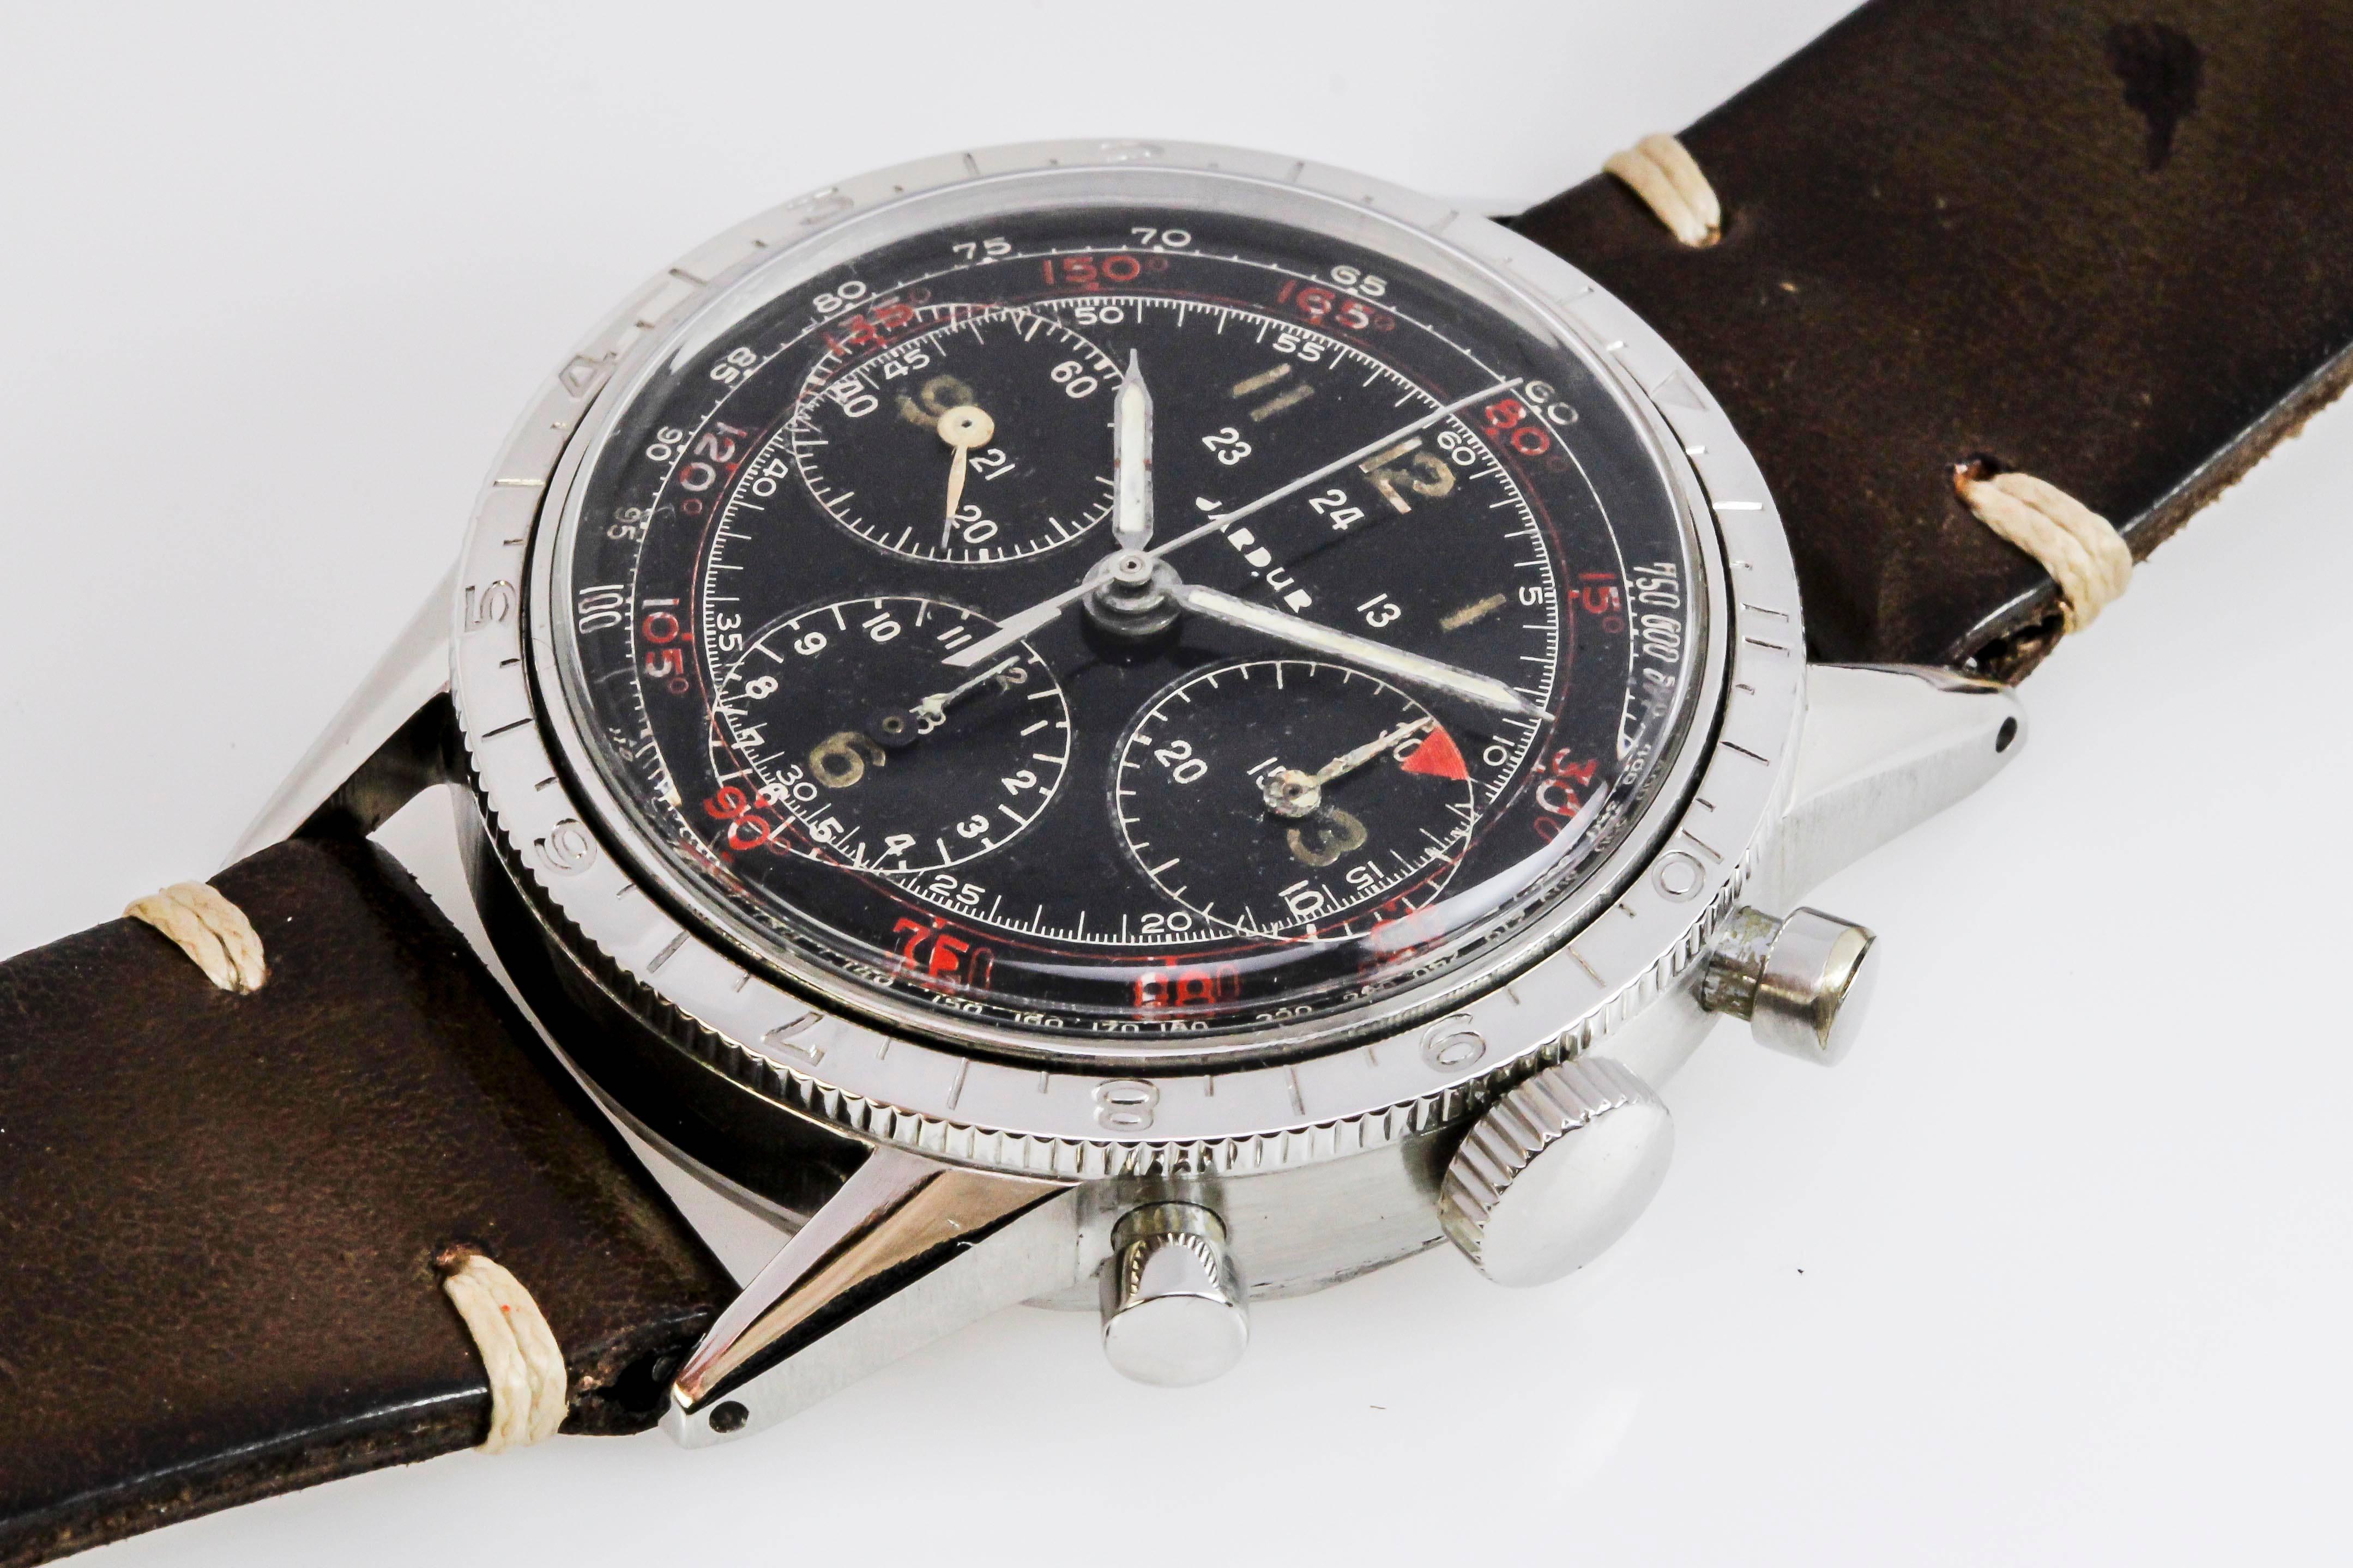 Jardur chronograph with an exquisite shiny dial and a manual wind movement.
